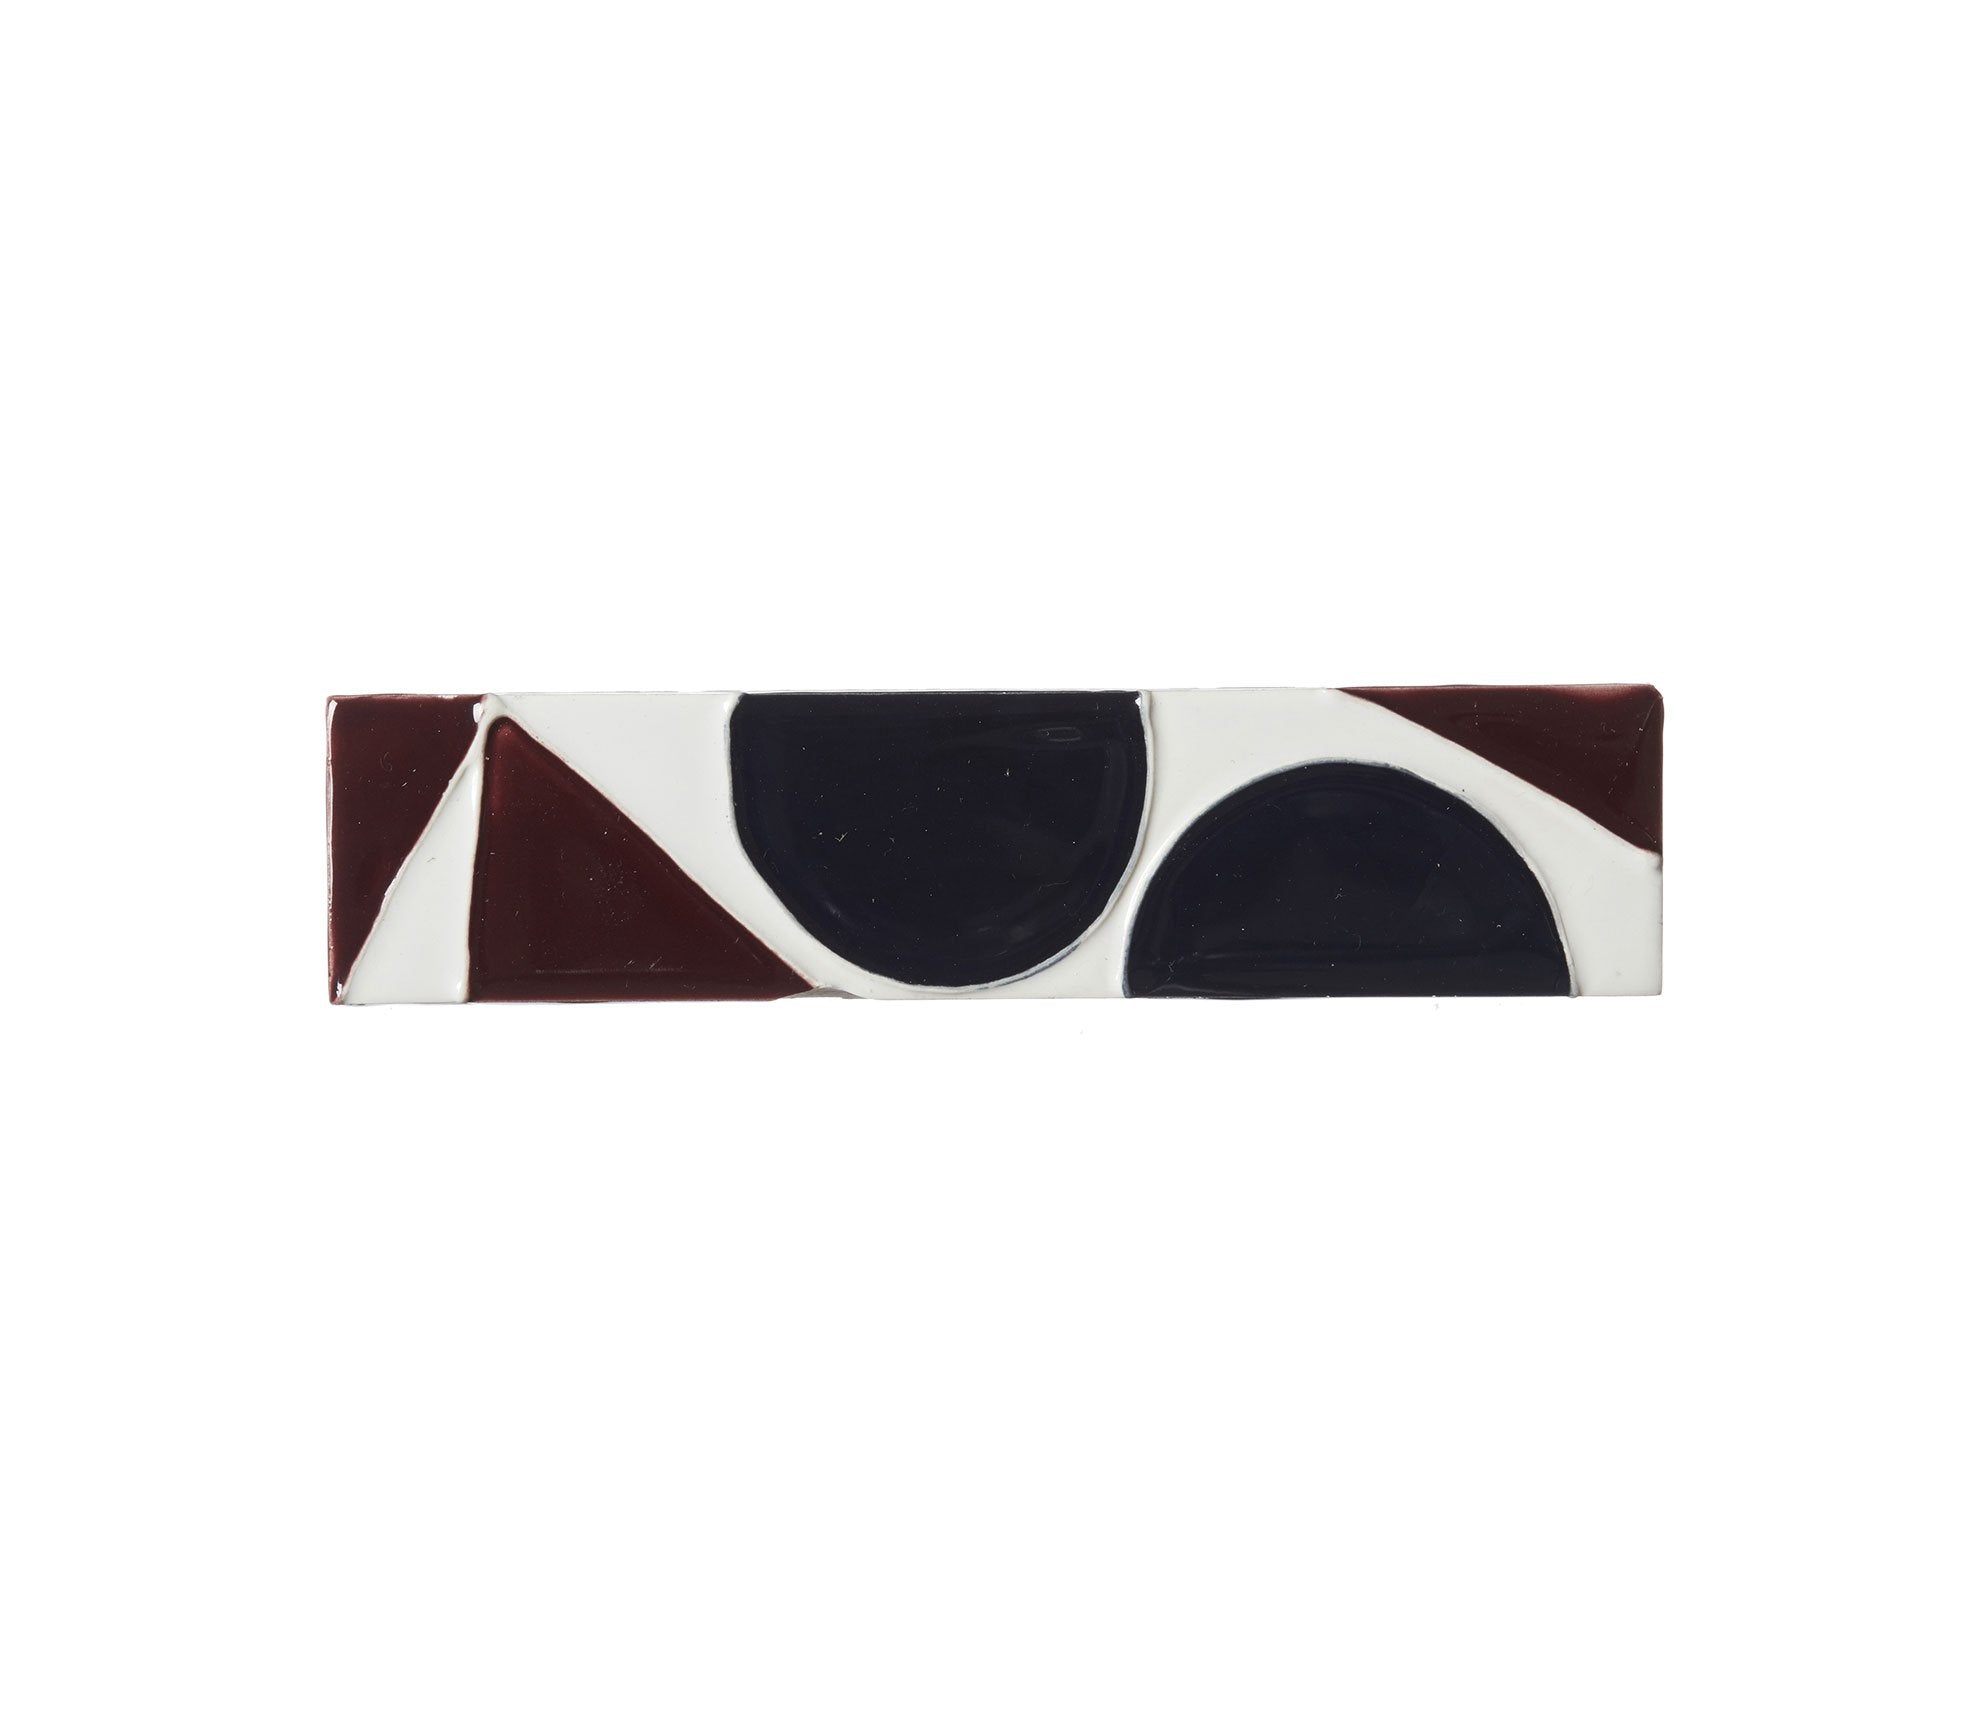 Hanley Tube Lined Decorative Tiles Product Image 39